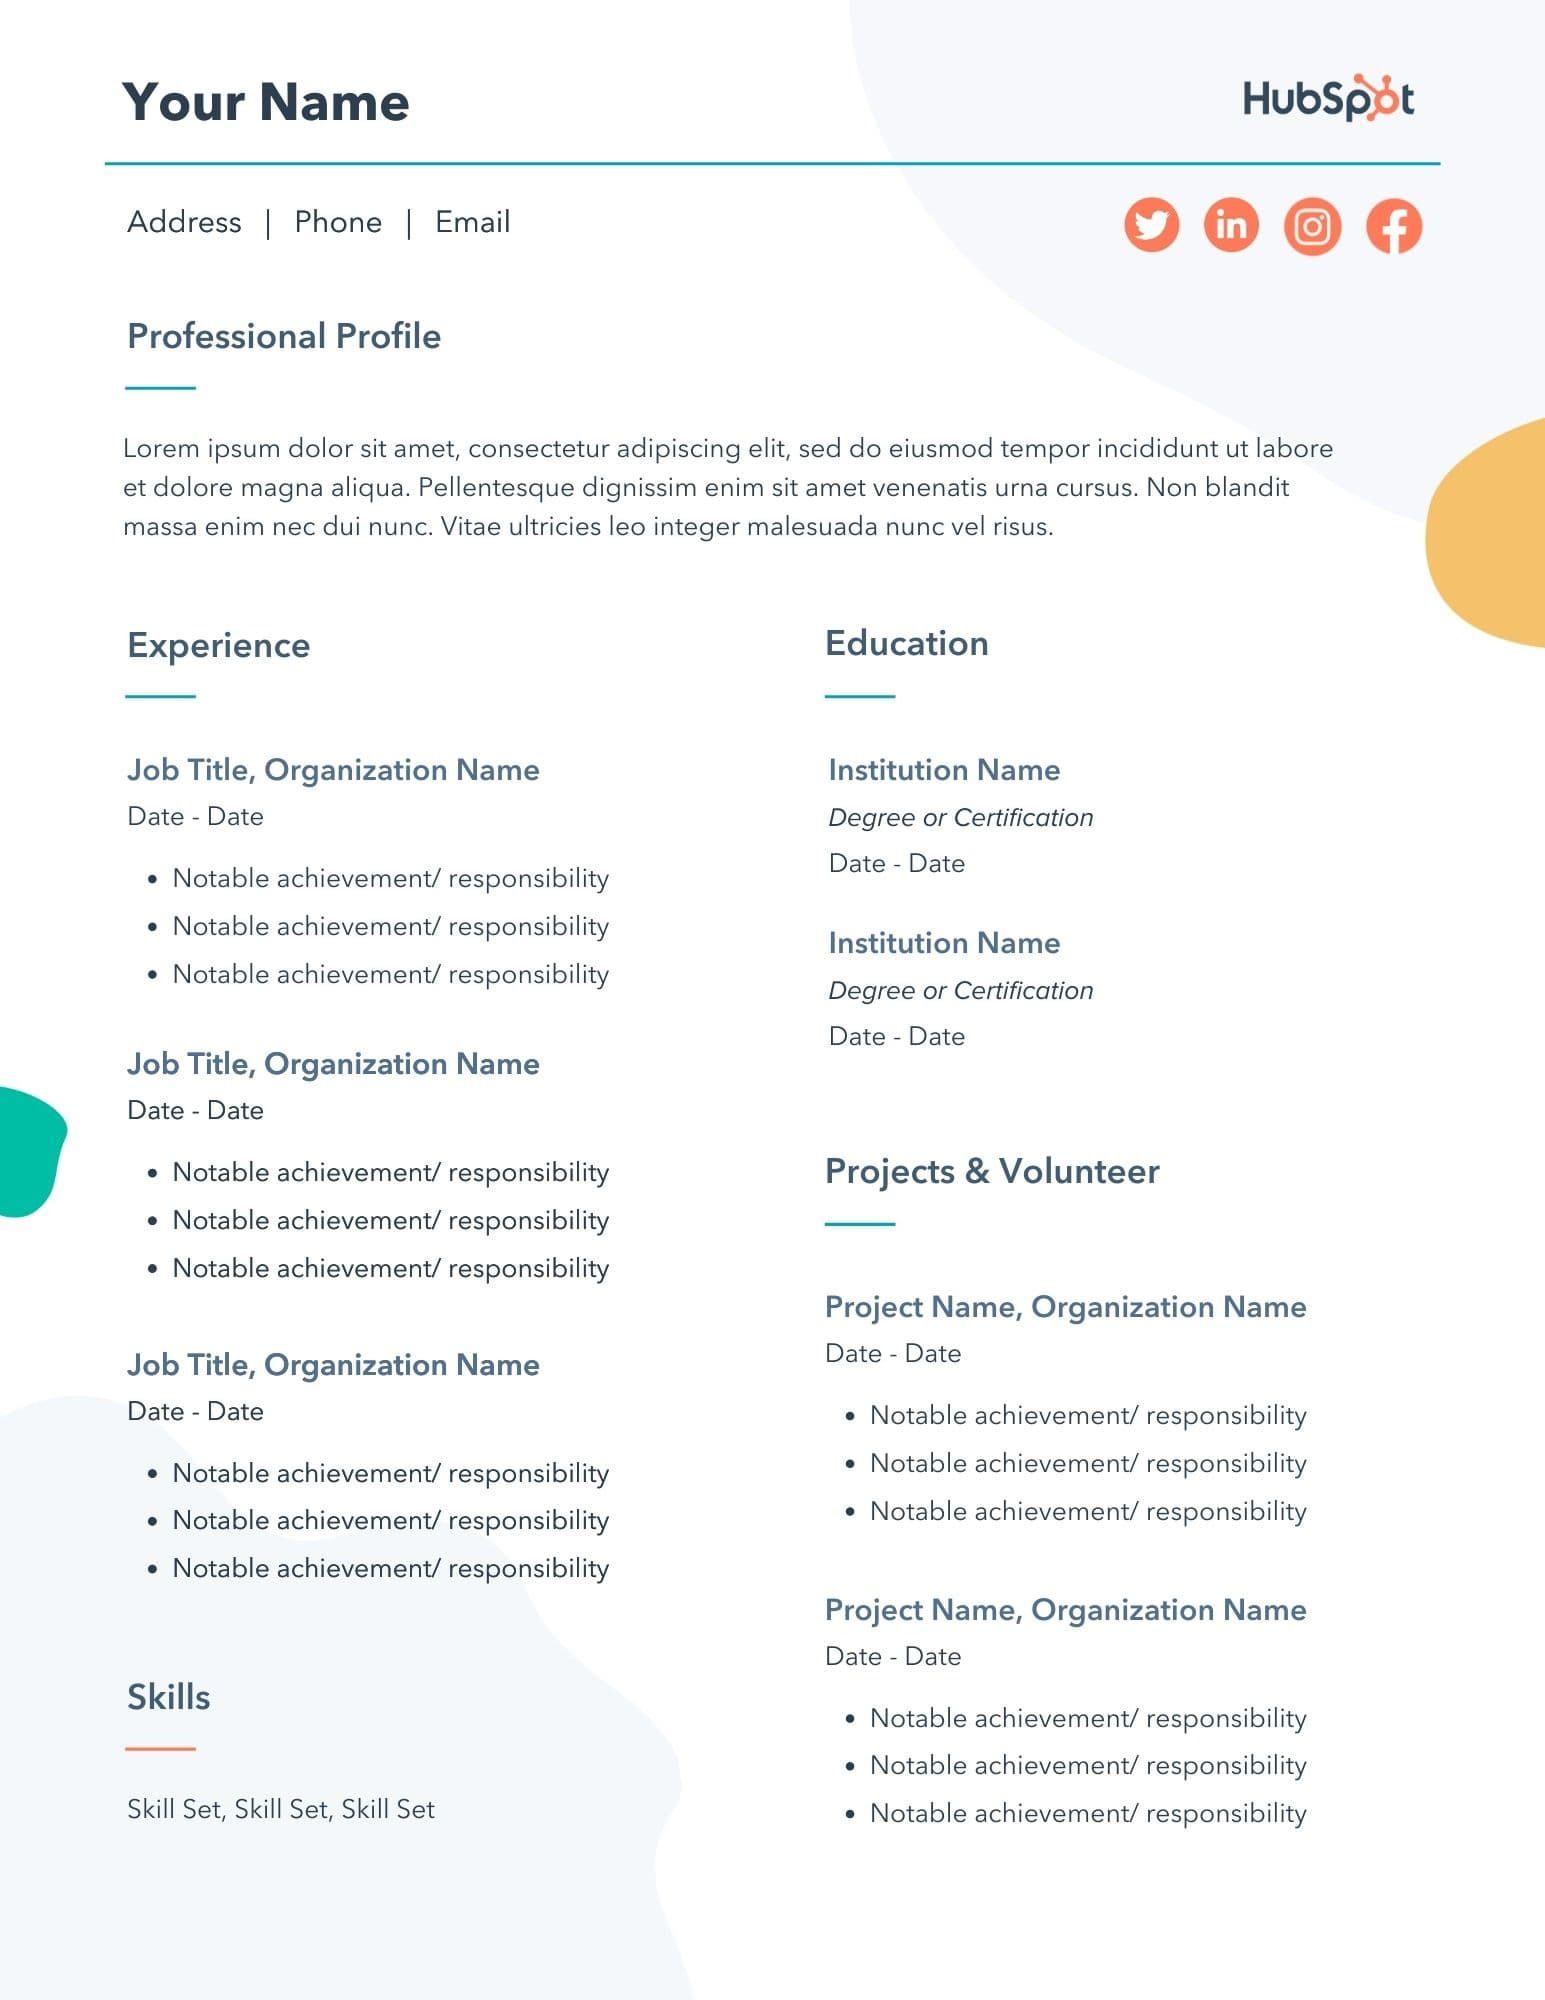 Thank You for Your Resume Template 29 Free Resume Templates for Microsoft Word (& How to Make Your Own)